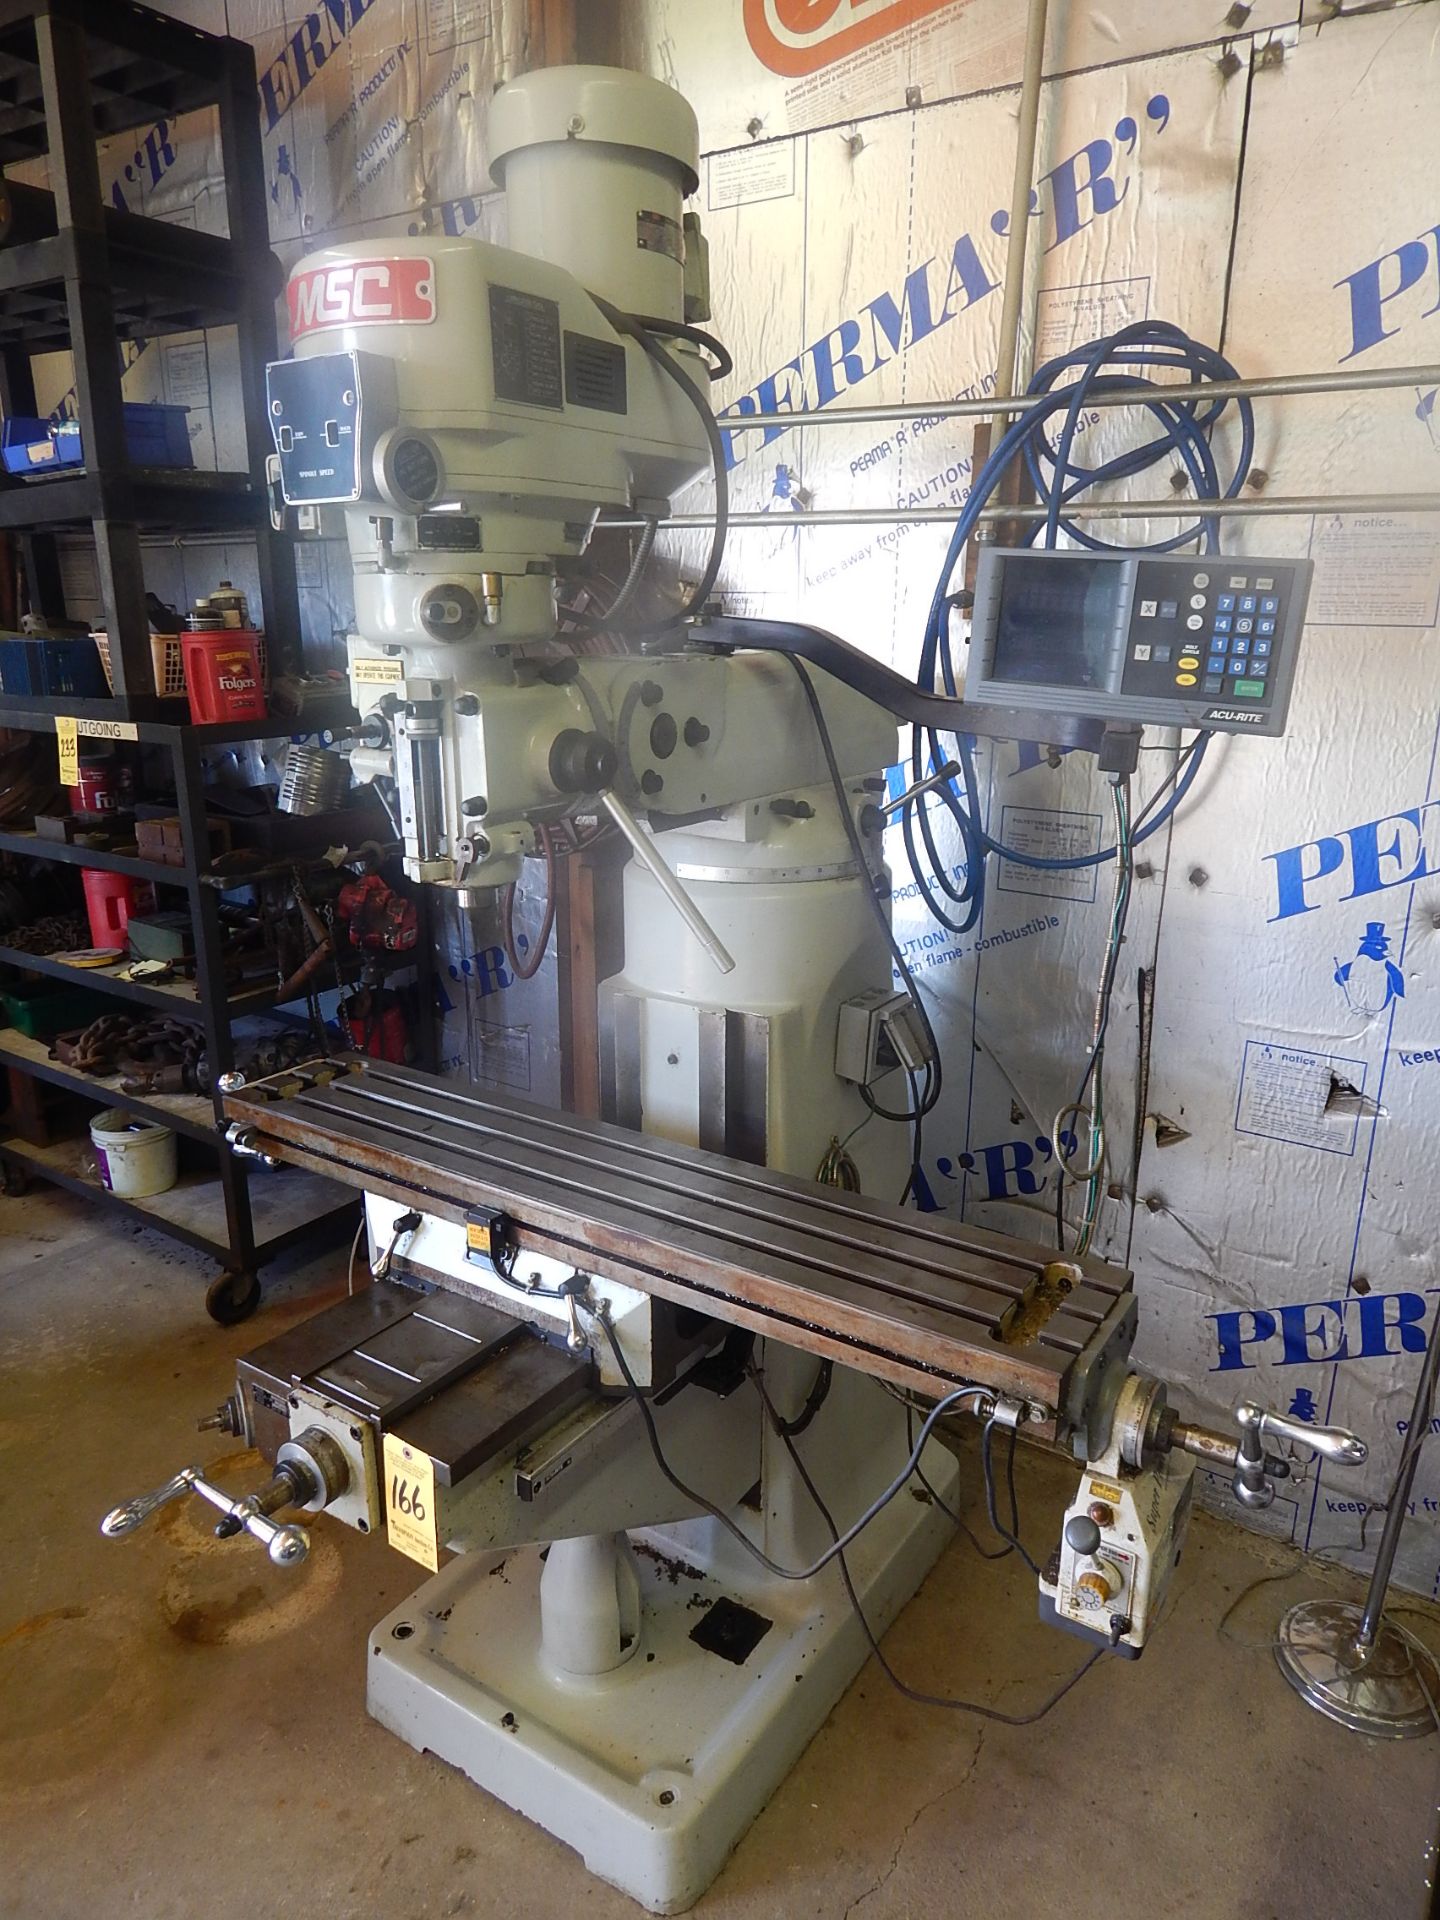 MSC Variable Speed Vertical Milling Machine, Acu-Rite DRO, 9" x 49" Table, with Power Feed, - Image 3 of 6